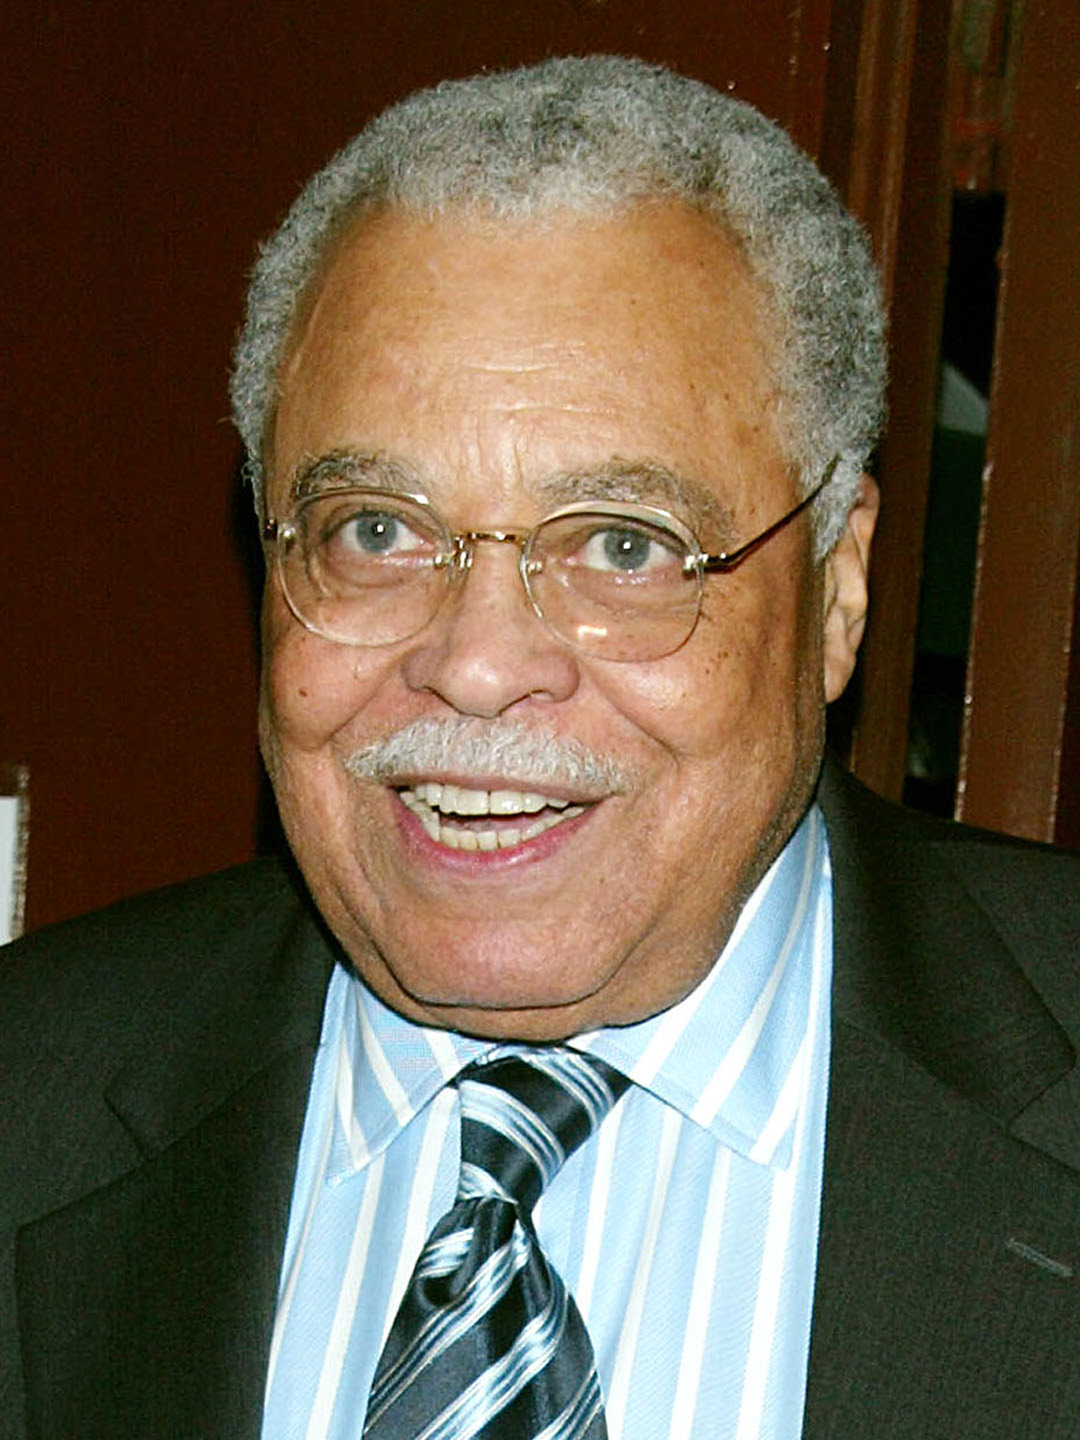 “I sat by James Earl Jones on a plane when I was a little kid. He was so nice. I asked him to say famous lines from the Star Wars movie, and he happily obliged. At the end of the trip, he shook my little hand and said, ‘May the Force be with you!’ What a kind gentleman.”